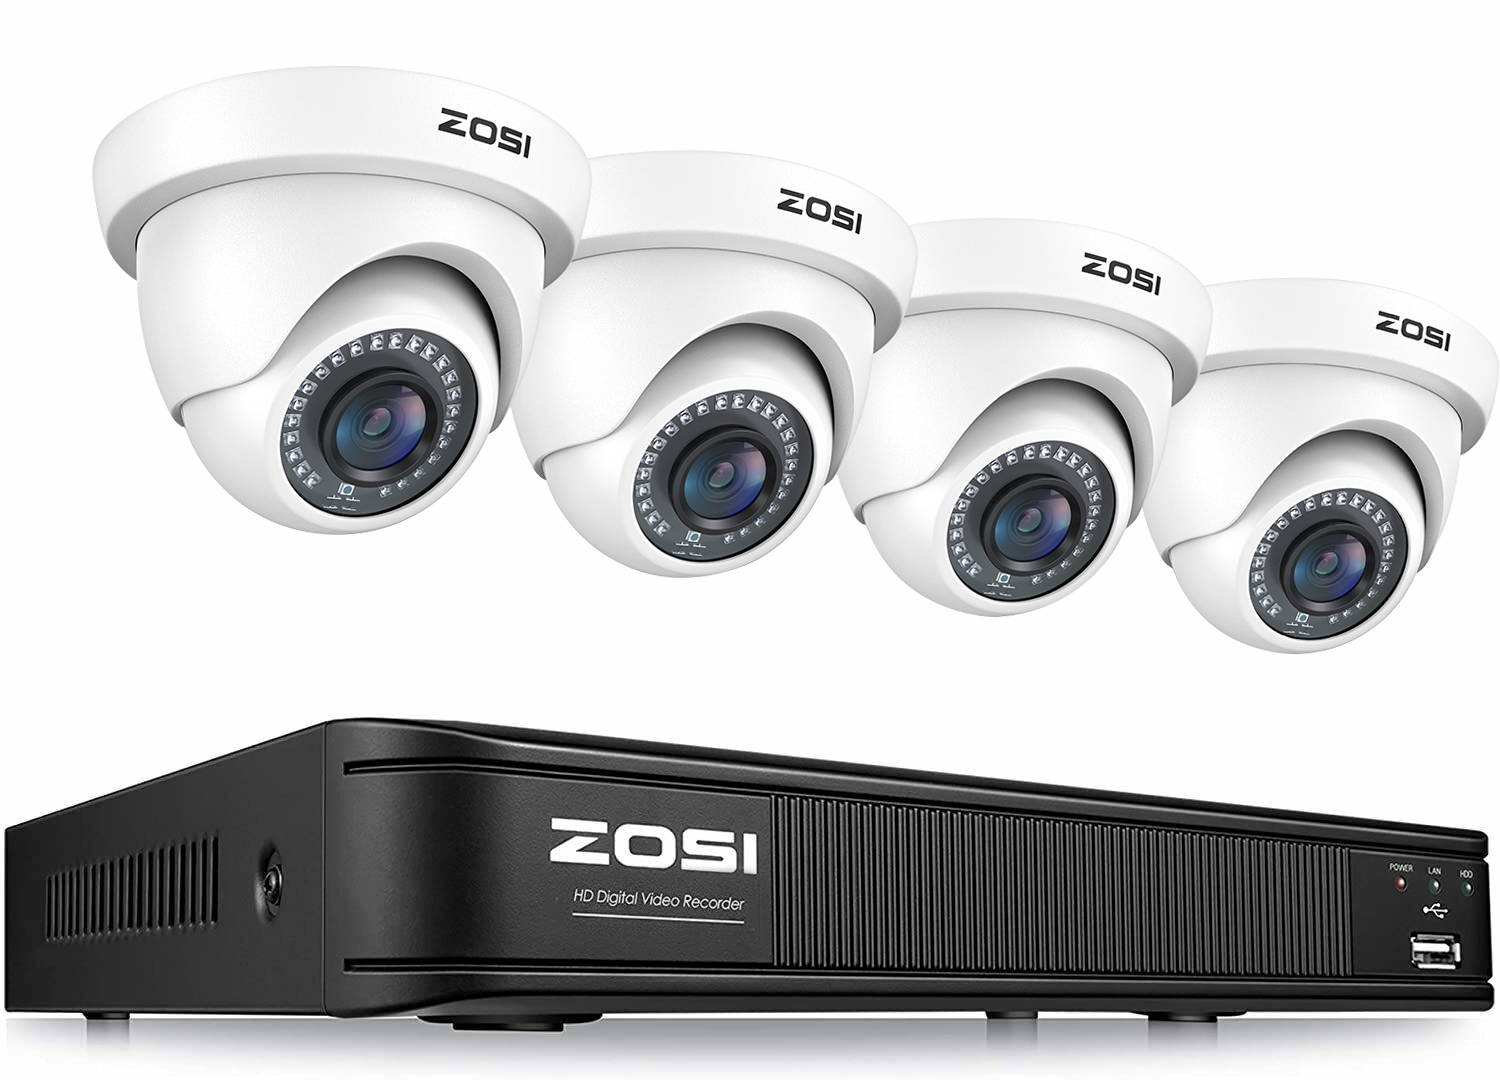 ZOSI H.265+ 1080P HDMI 8 Channel DVR 1500TVL Outdoor CCTV Security Camera System ZOSI Does Not Apply